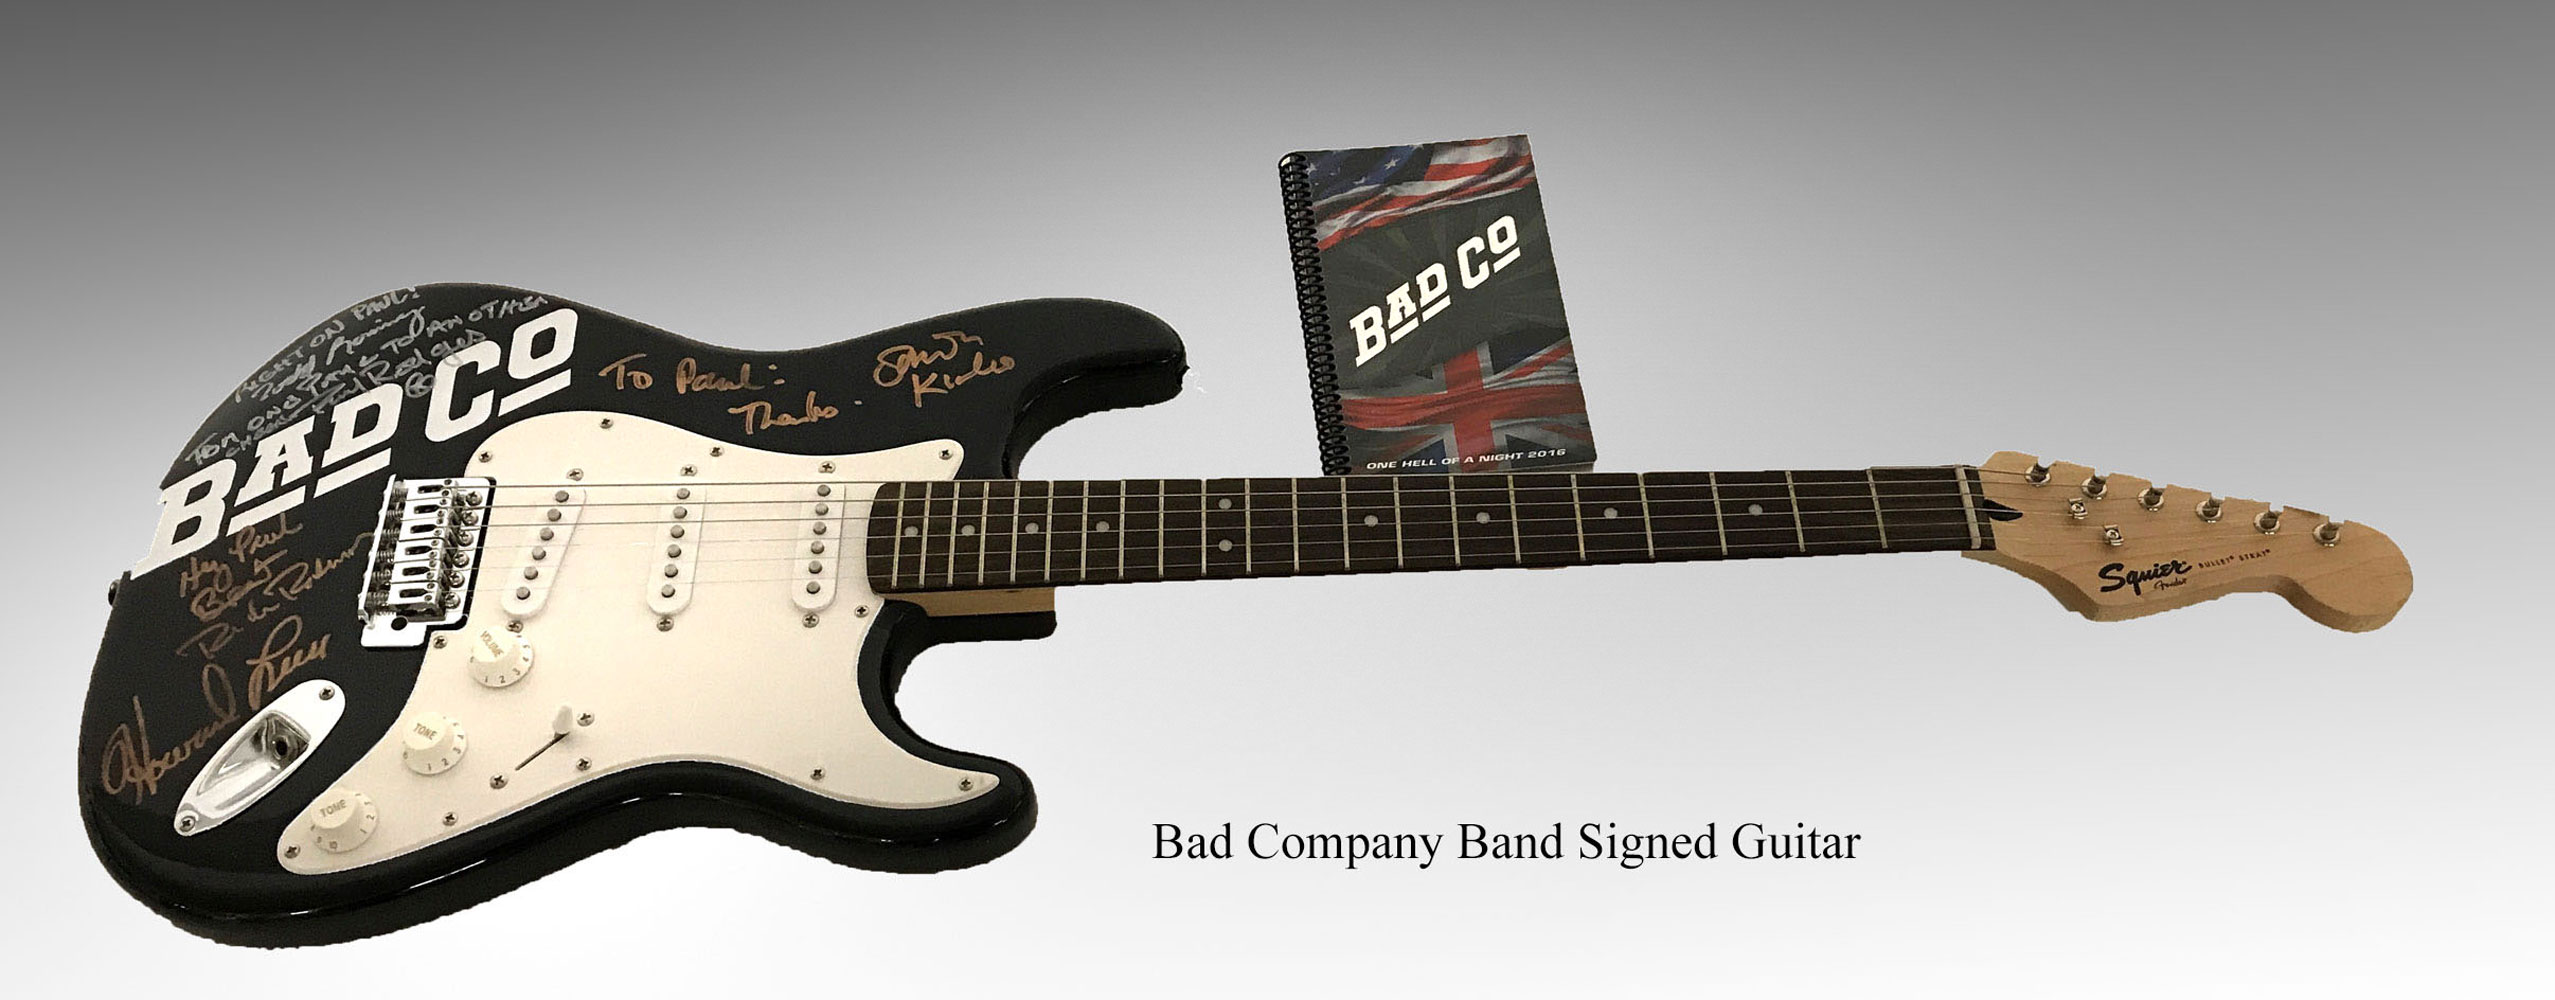 SIGNED BAD COMPANY FENDER SQUIRE